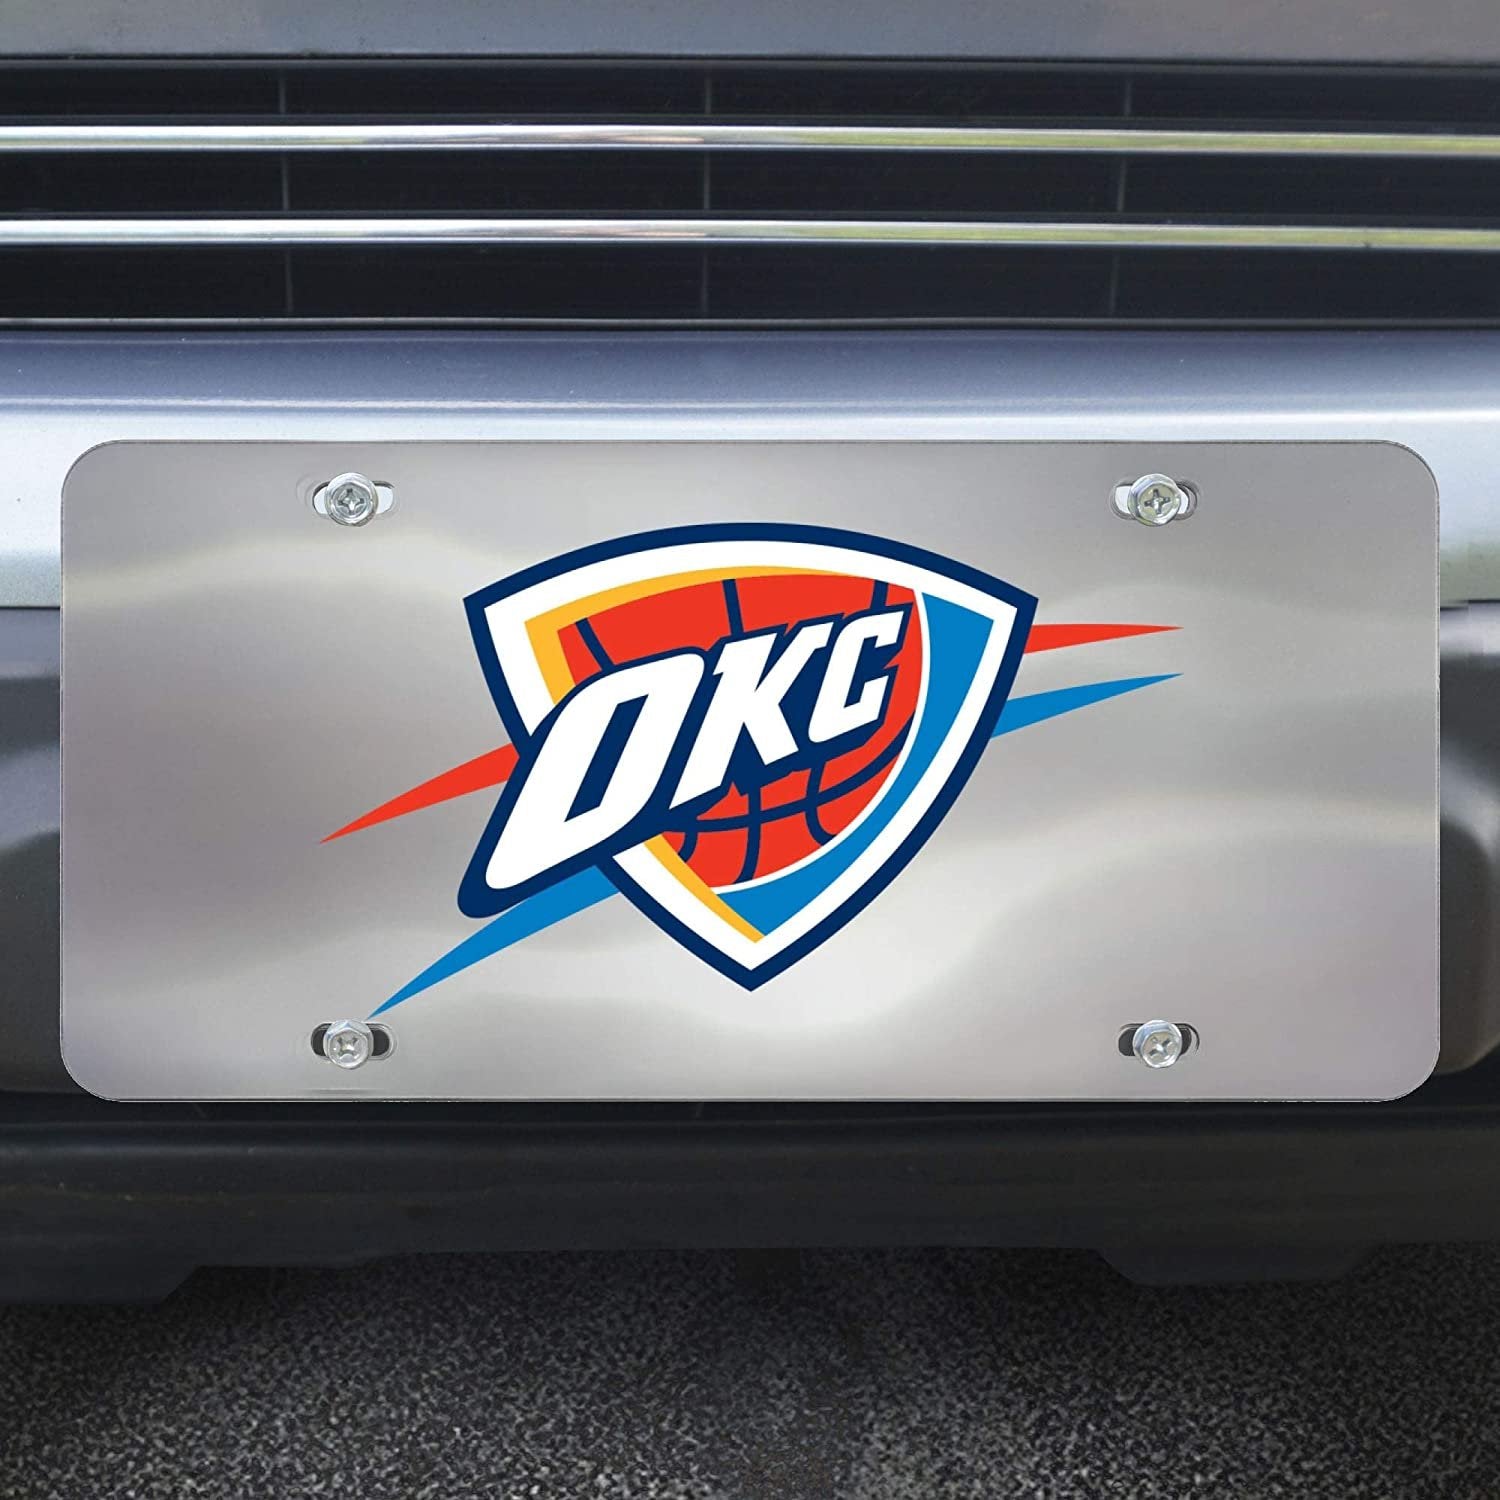 Oklahoma City Thunder License Plate Tag, Premium Stainless Steel Diecast, Chrome, Raised Solid Metal Color Emblem, 6x12 Inch